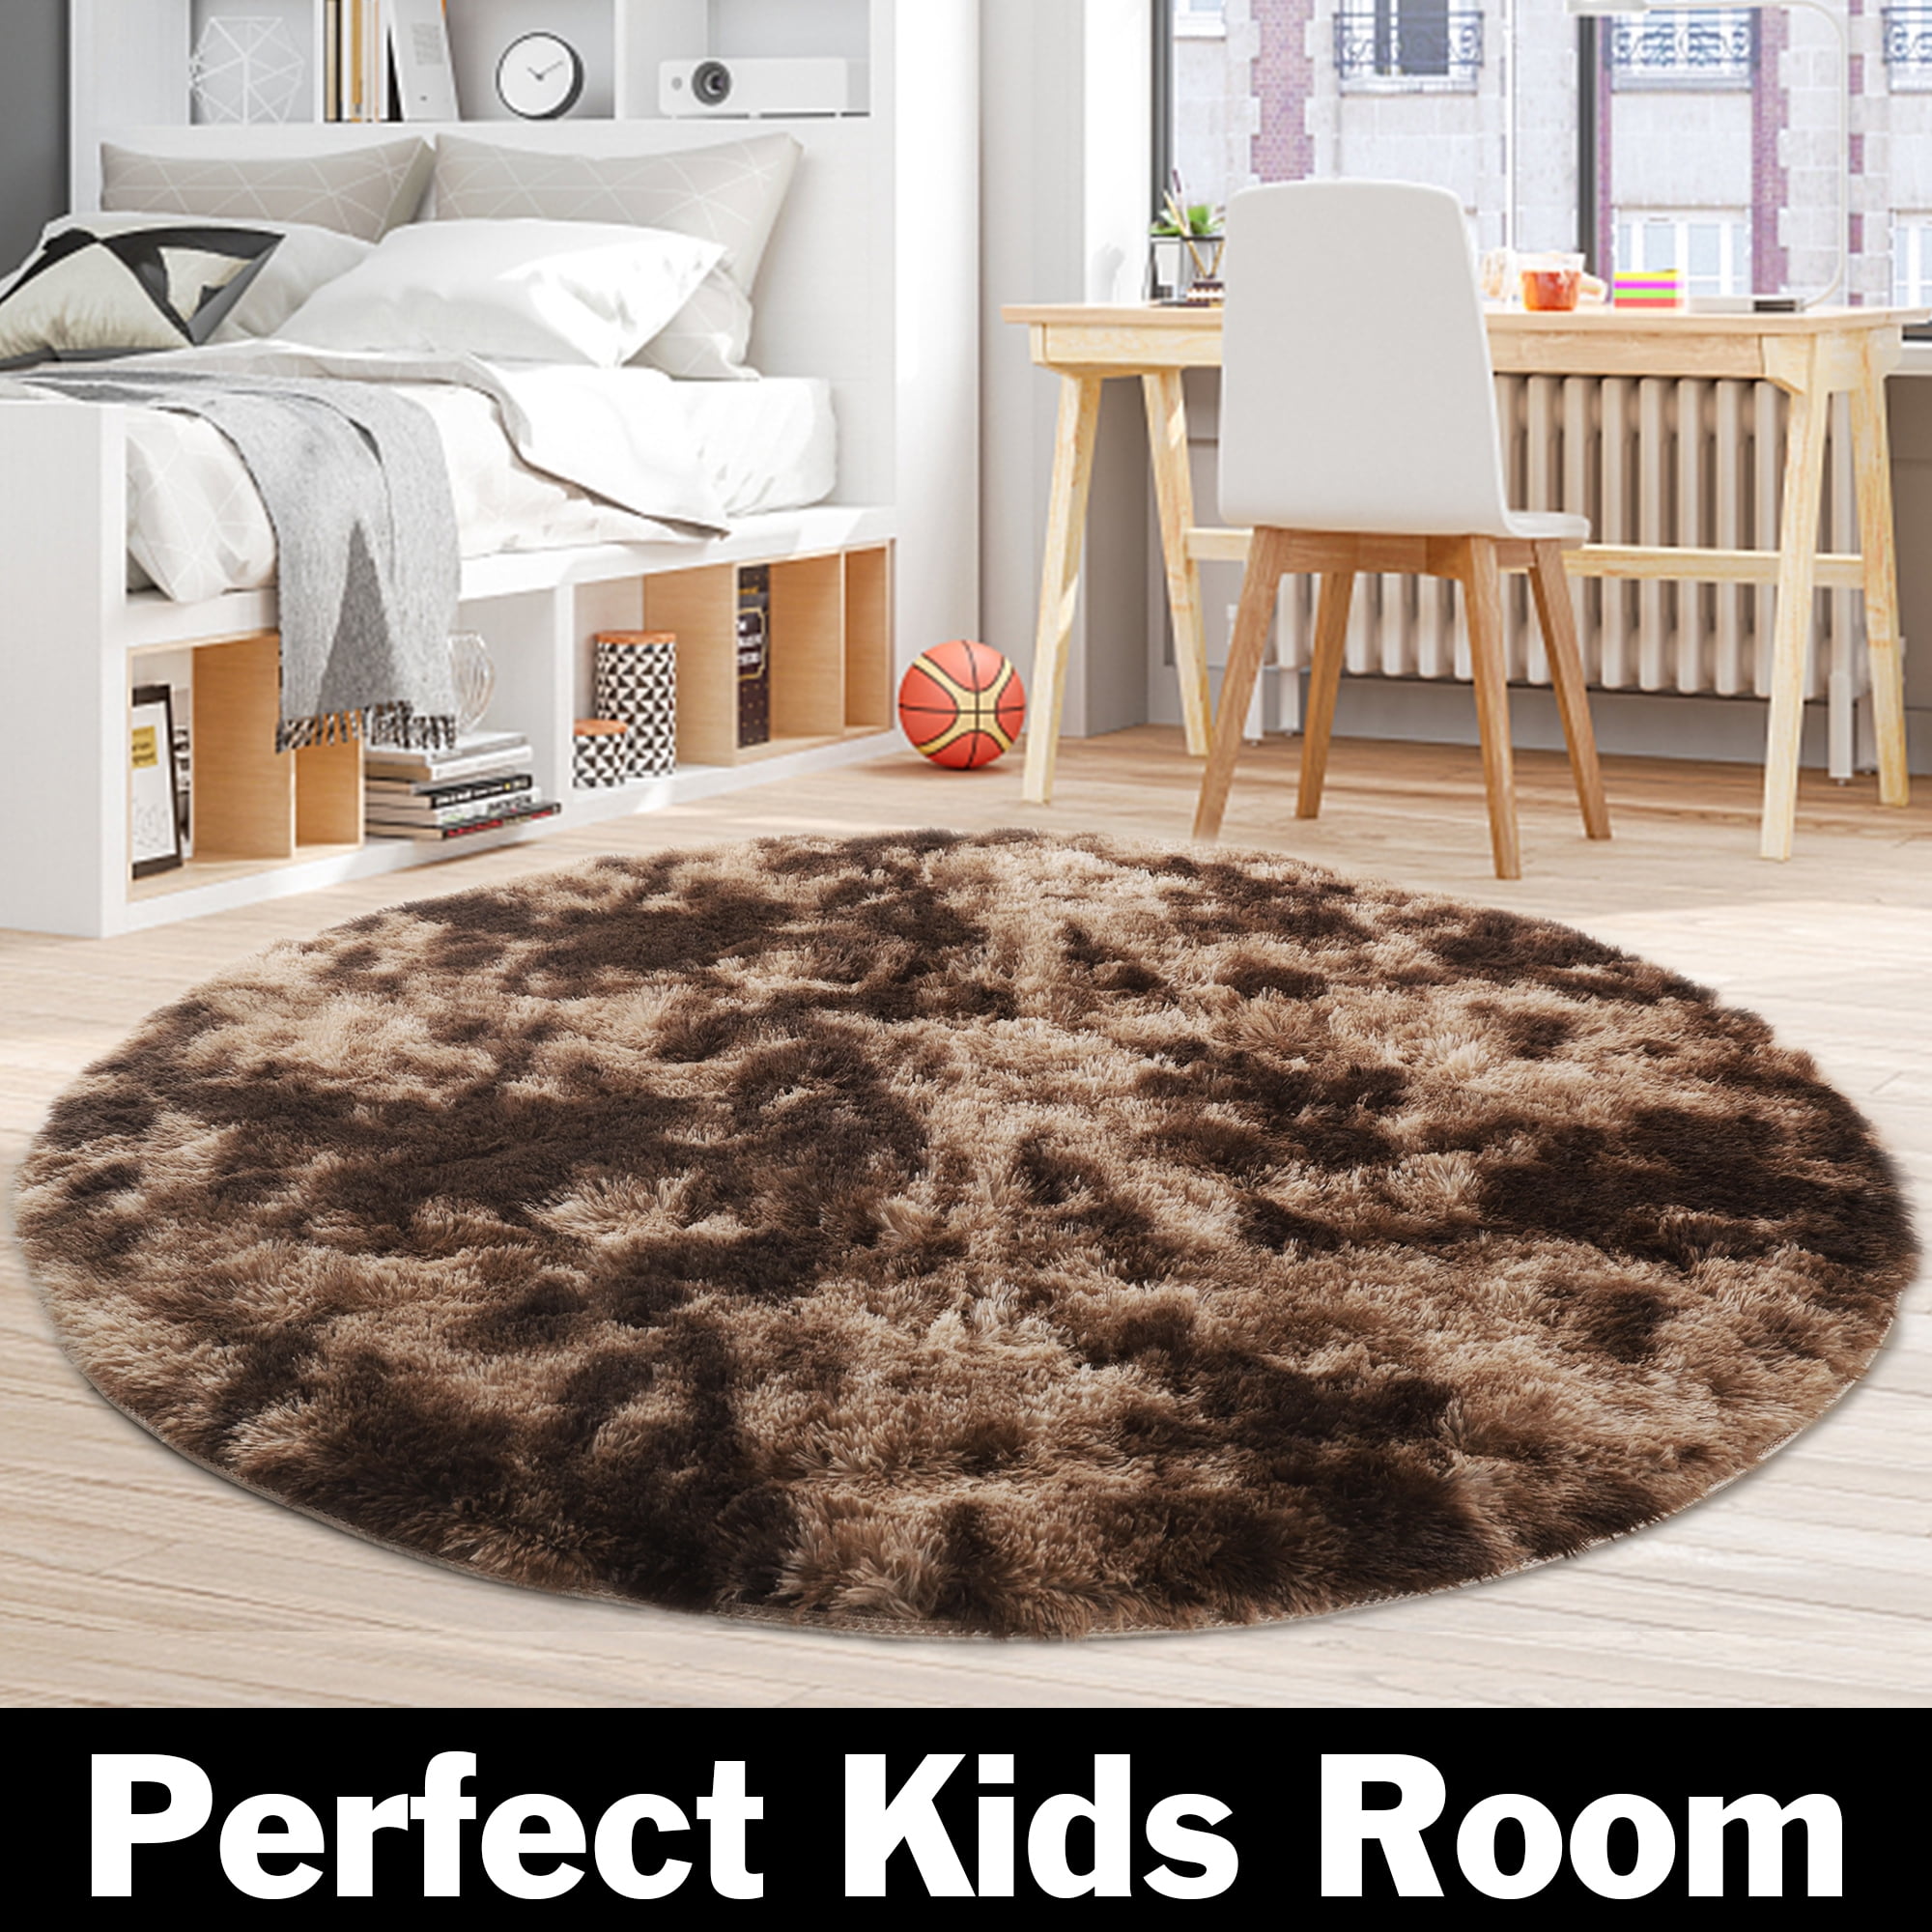 TENNOLA White Round Rugs for Bedroom, 5x5 Feet Fluffy Circle Rug for Kids  Room, Furry Carpet for Teen's Room, Shaggy Circular Rug for Nursery Room